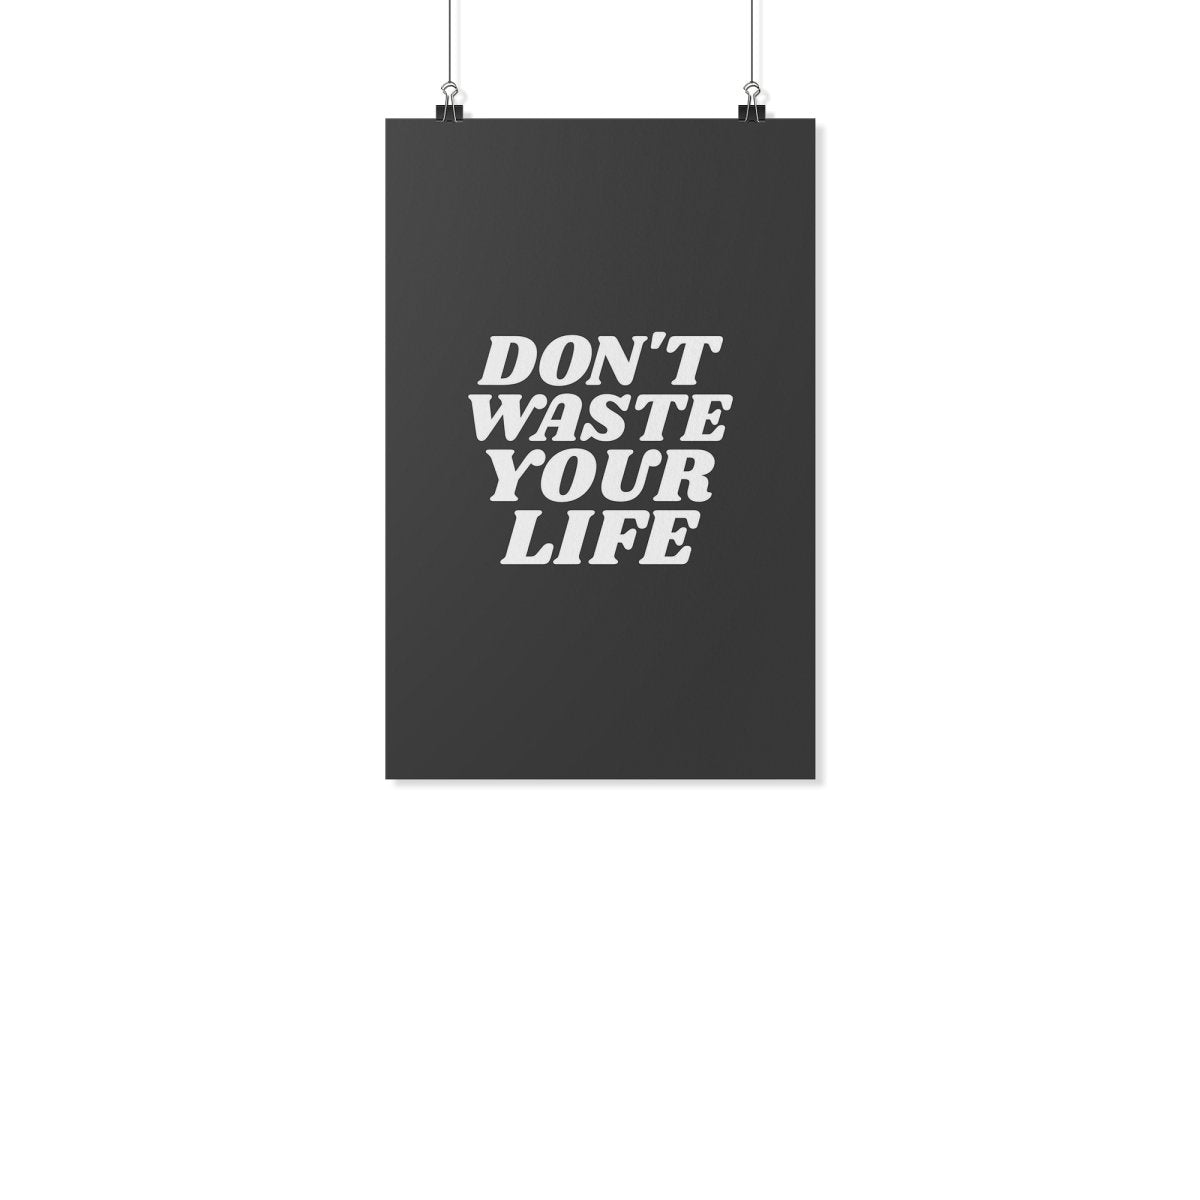 Don't Waste Your Life (Wall Poster) - SDG Clothing